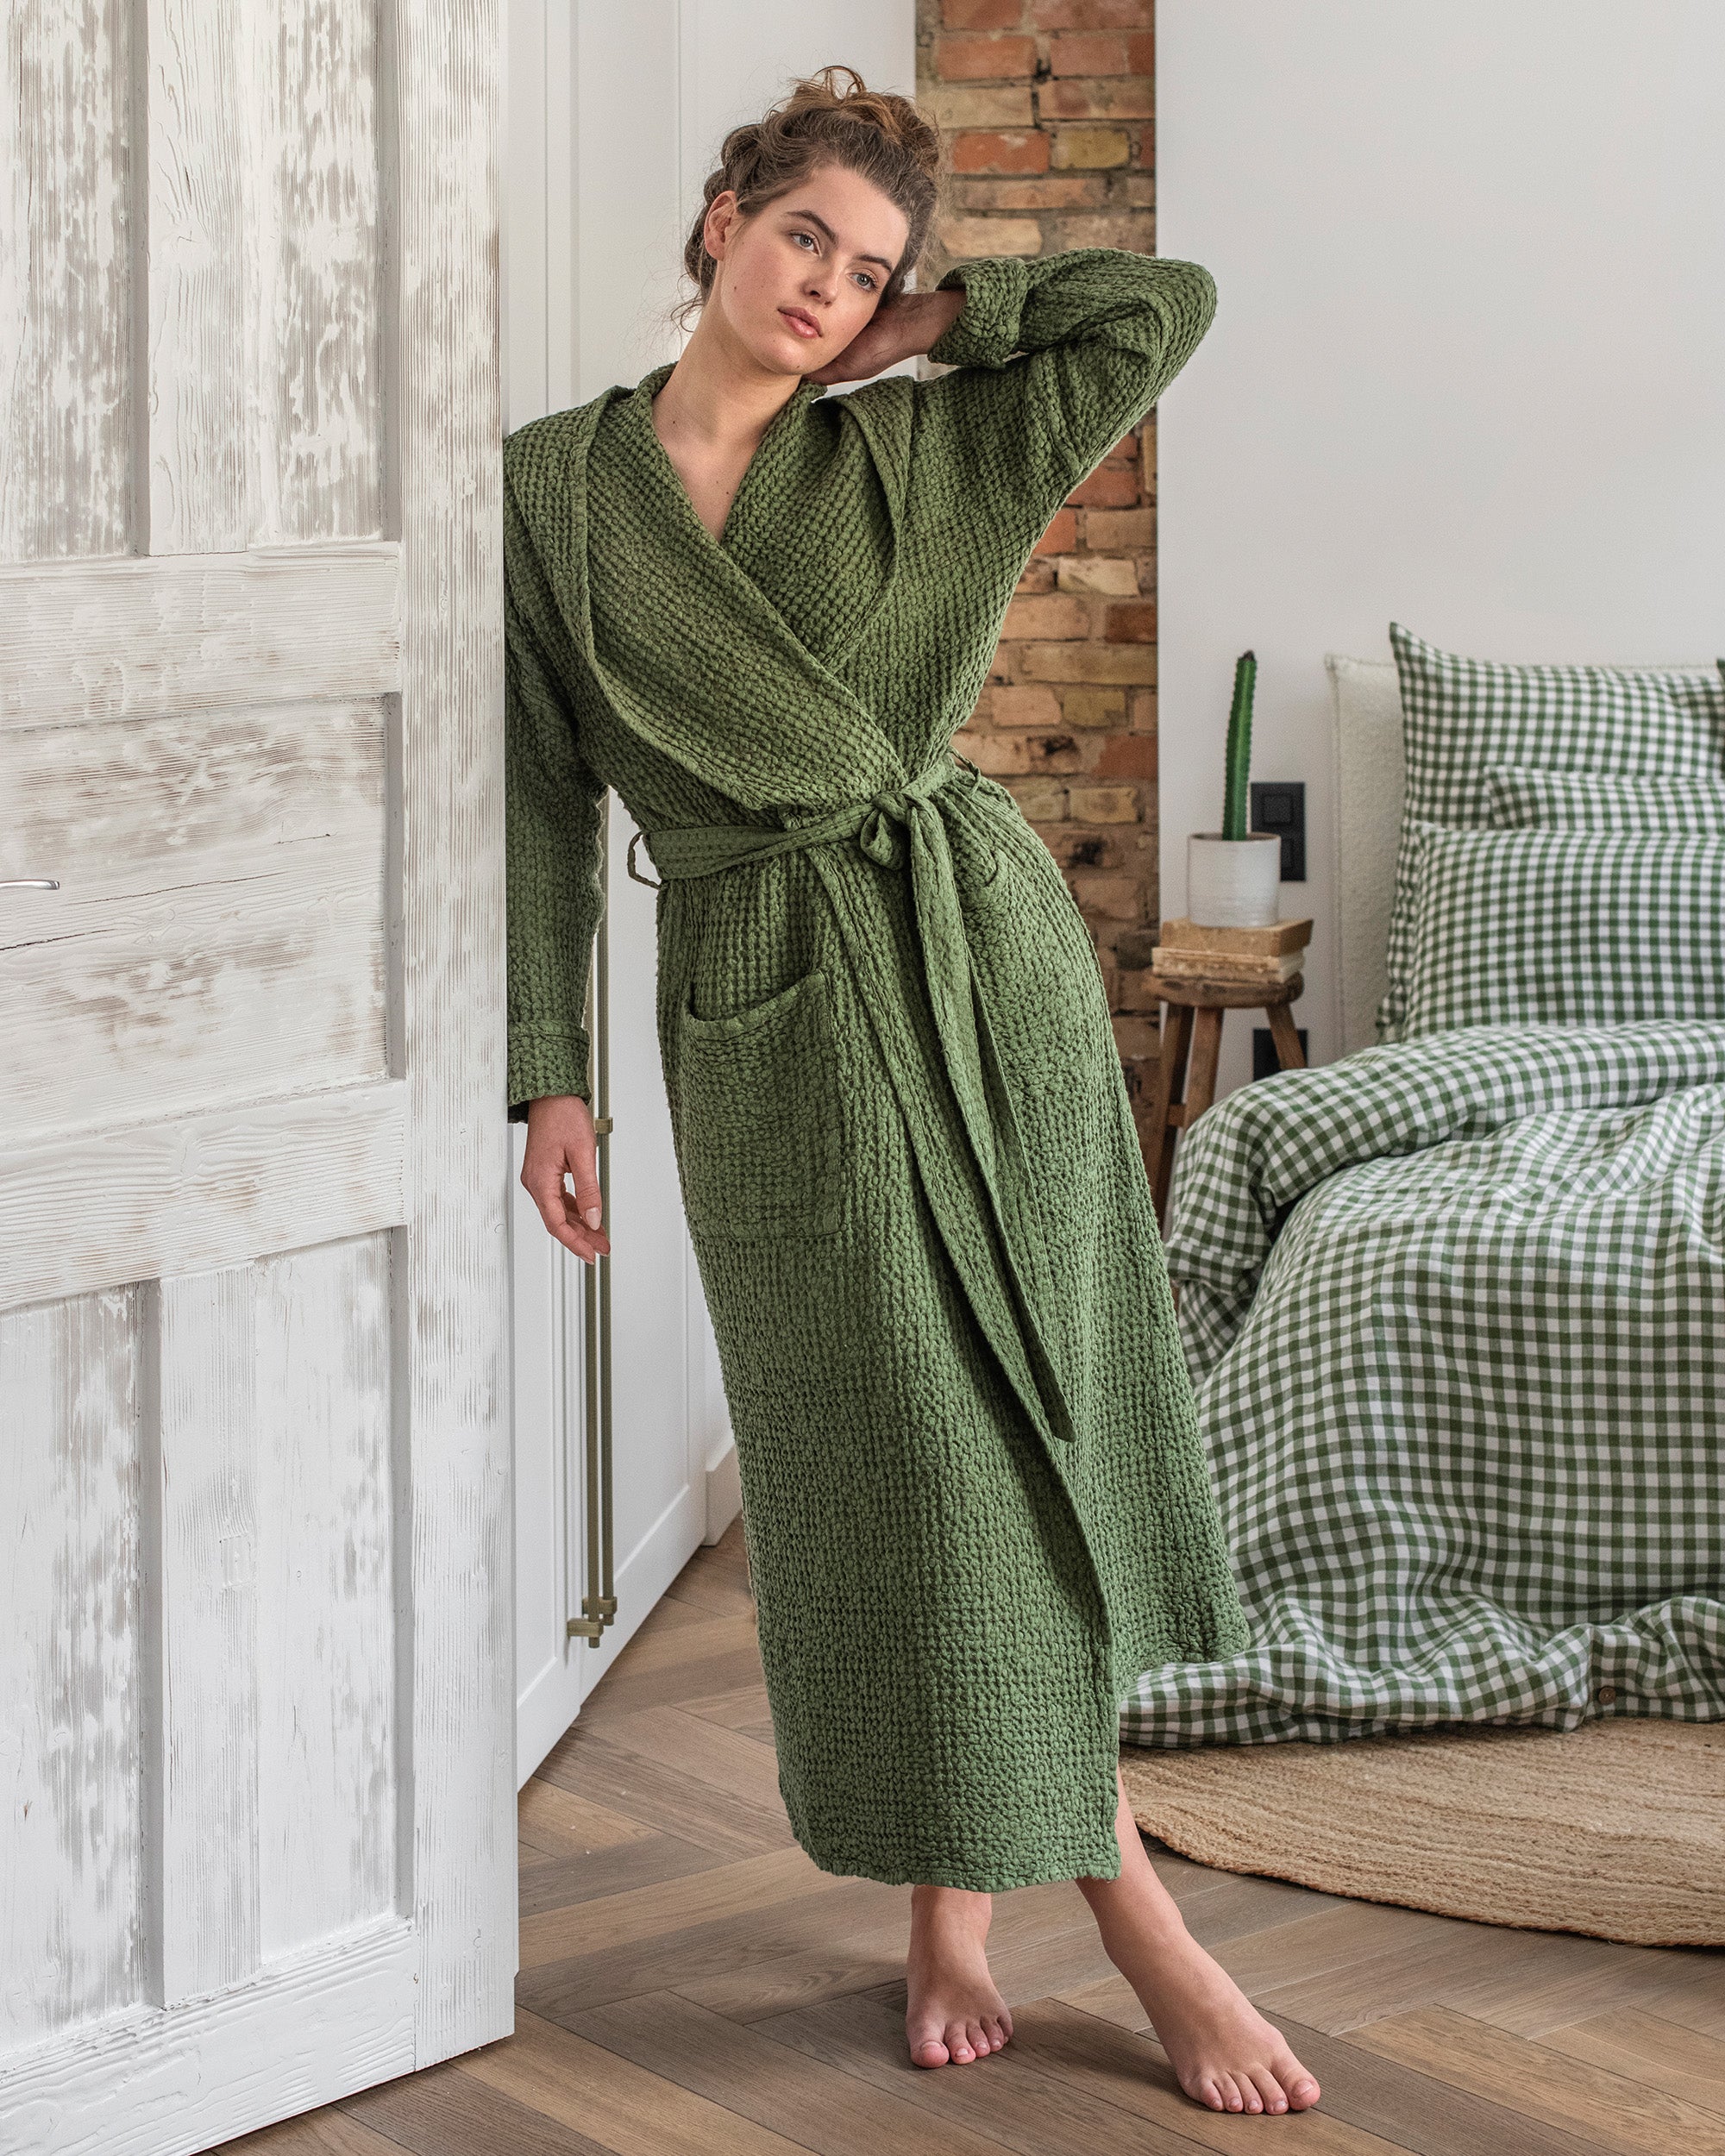 The Company Store Air Layer Women's Extra Small Green Cotton Robe 67046-XS- GREEN - The Home Depot